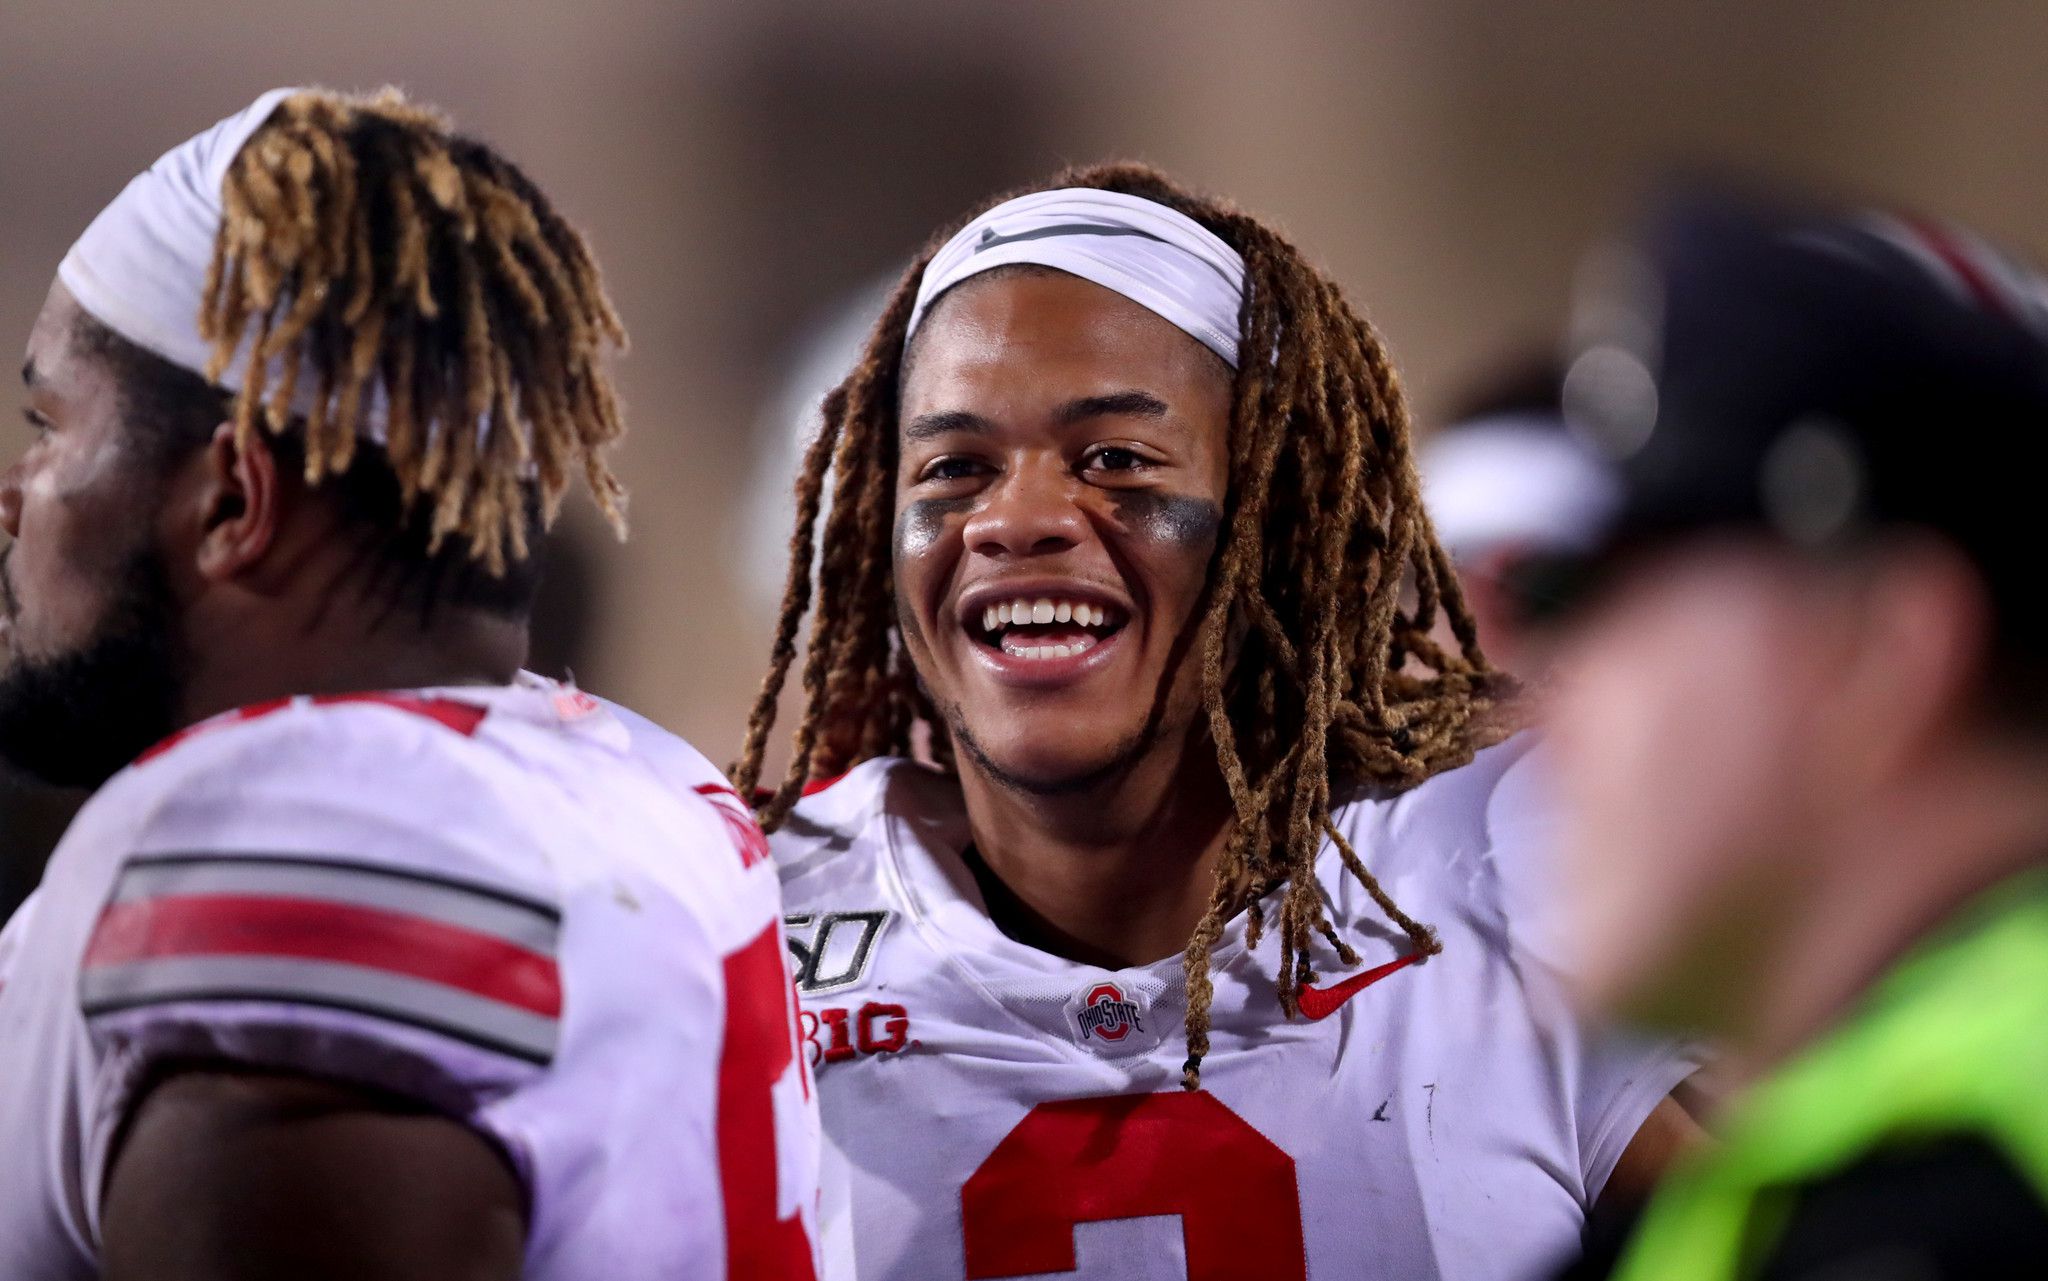 Chase Young to miss Ohio State's game due to NCAA issue